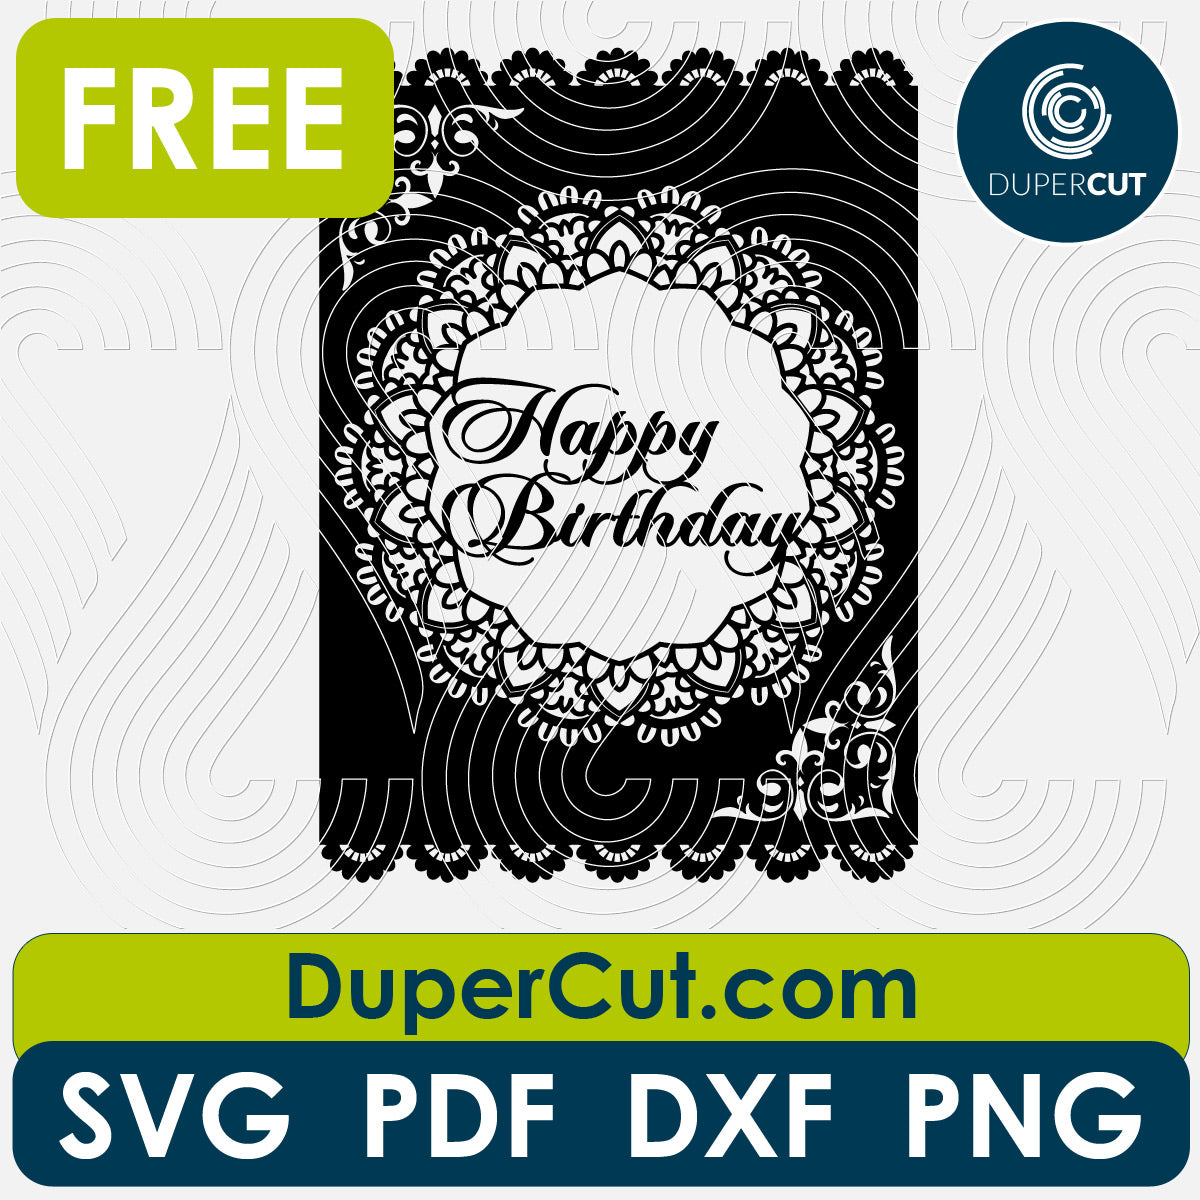 Detailed birthday card, FREE cutting template SVG PNG DXF files for Glowforge, Cricut, Silhouette, CNC laser router by DuperCut.com